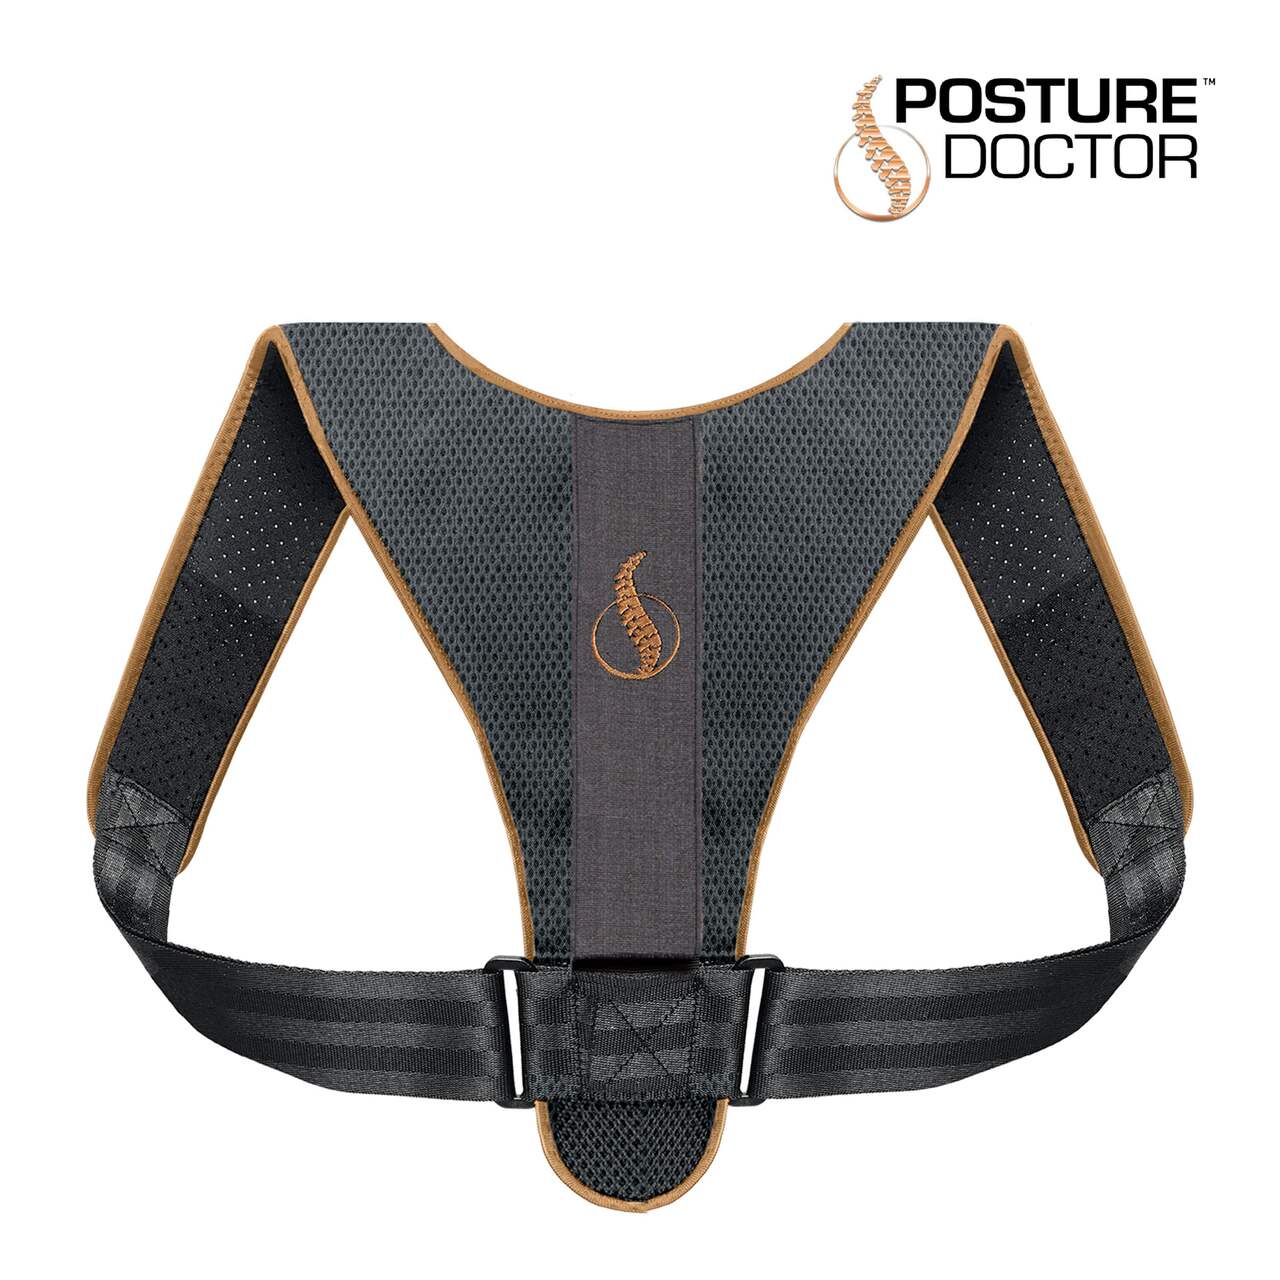 As Seen On TV Posture Doctor